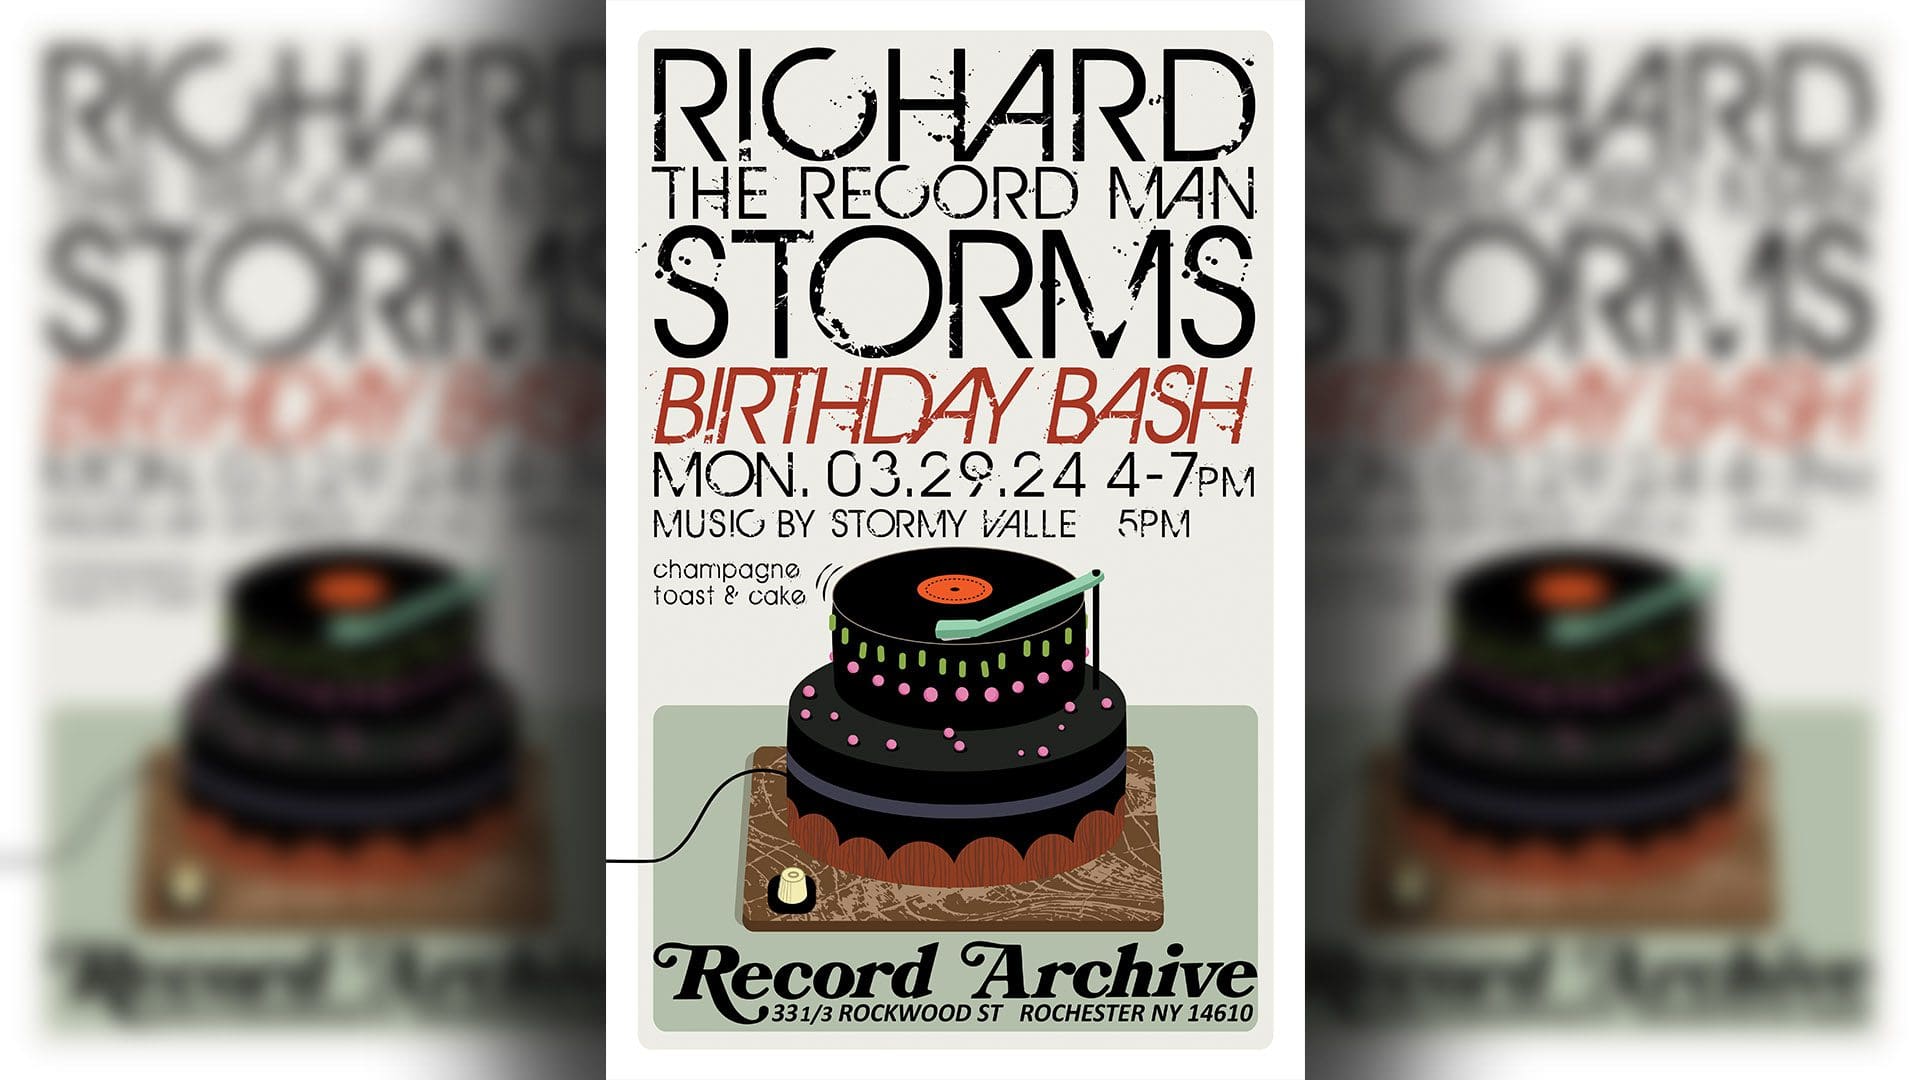 Richard The Record Man Storms Birthday Bash. Mon. 03.29.24 4-7pm. Music by Stormy Valle 5pm.<br />
champagne toast & cake. Record Archive 33 1/3 Rockwood St Rochester NY 14610